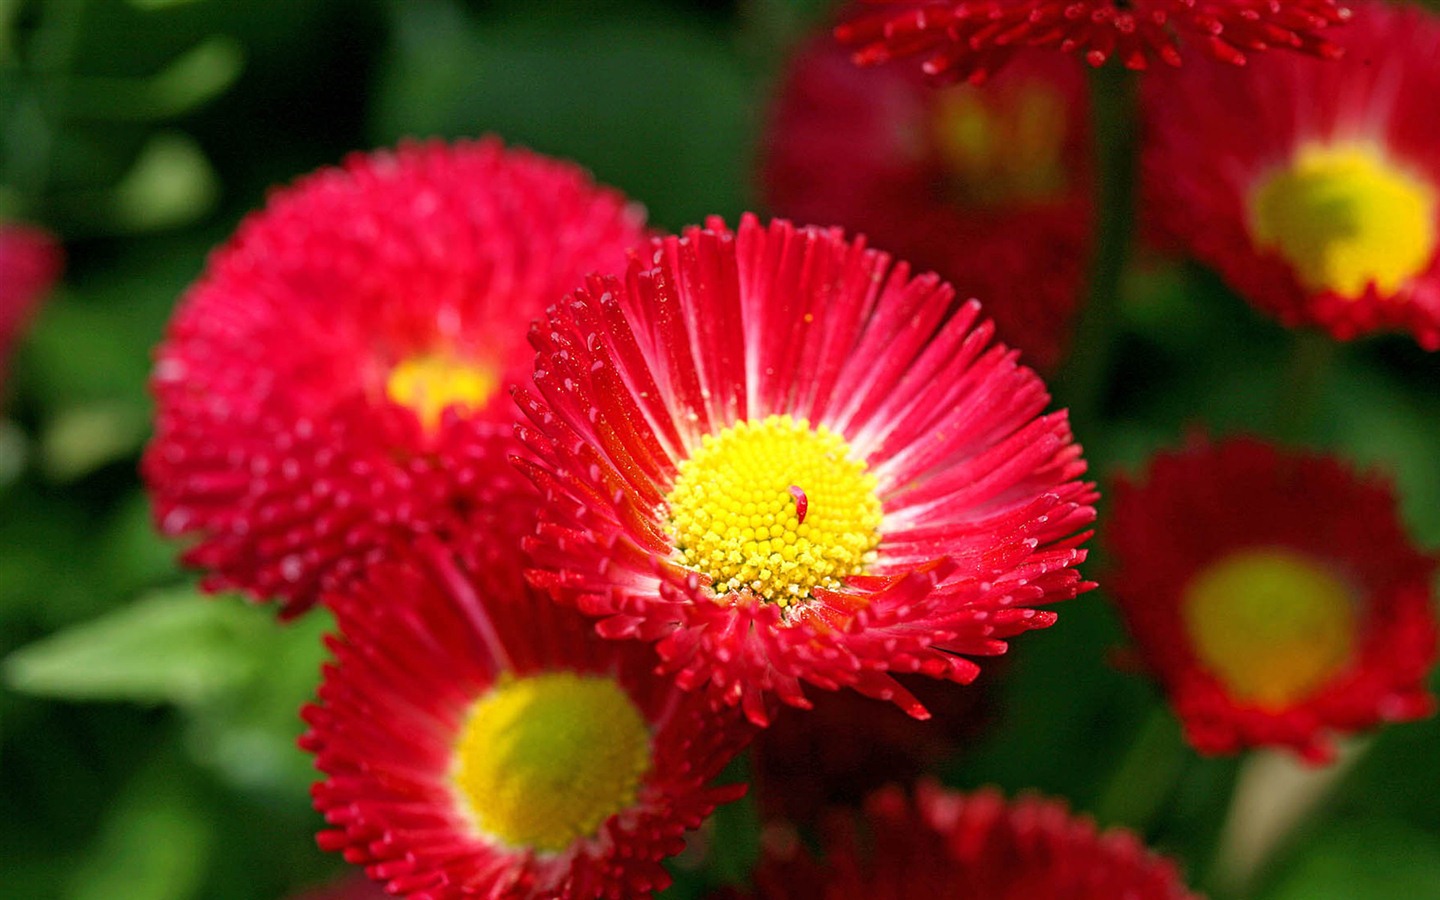 Daisies flowers close-up HD wallpapers #9 - 1440x900